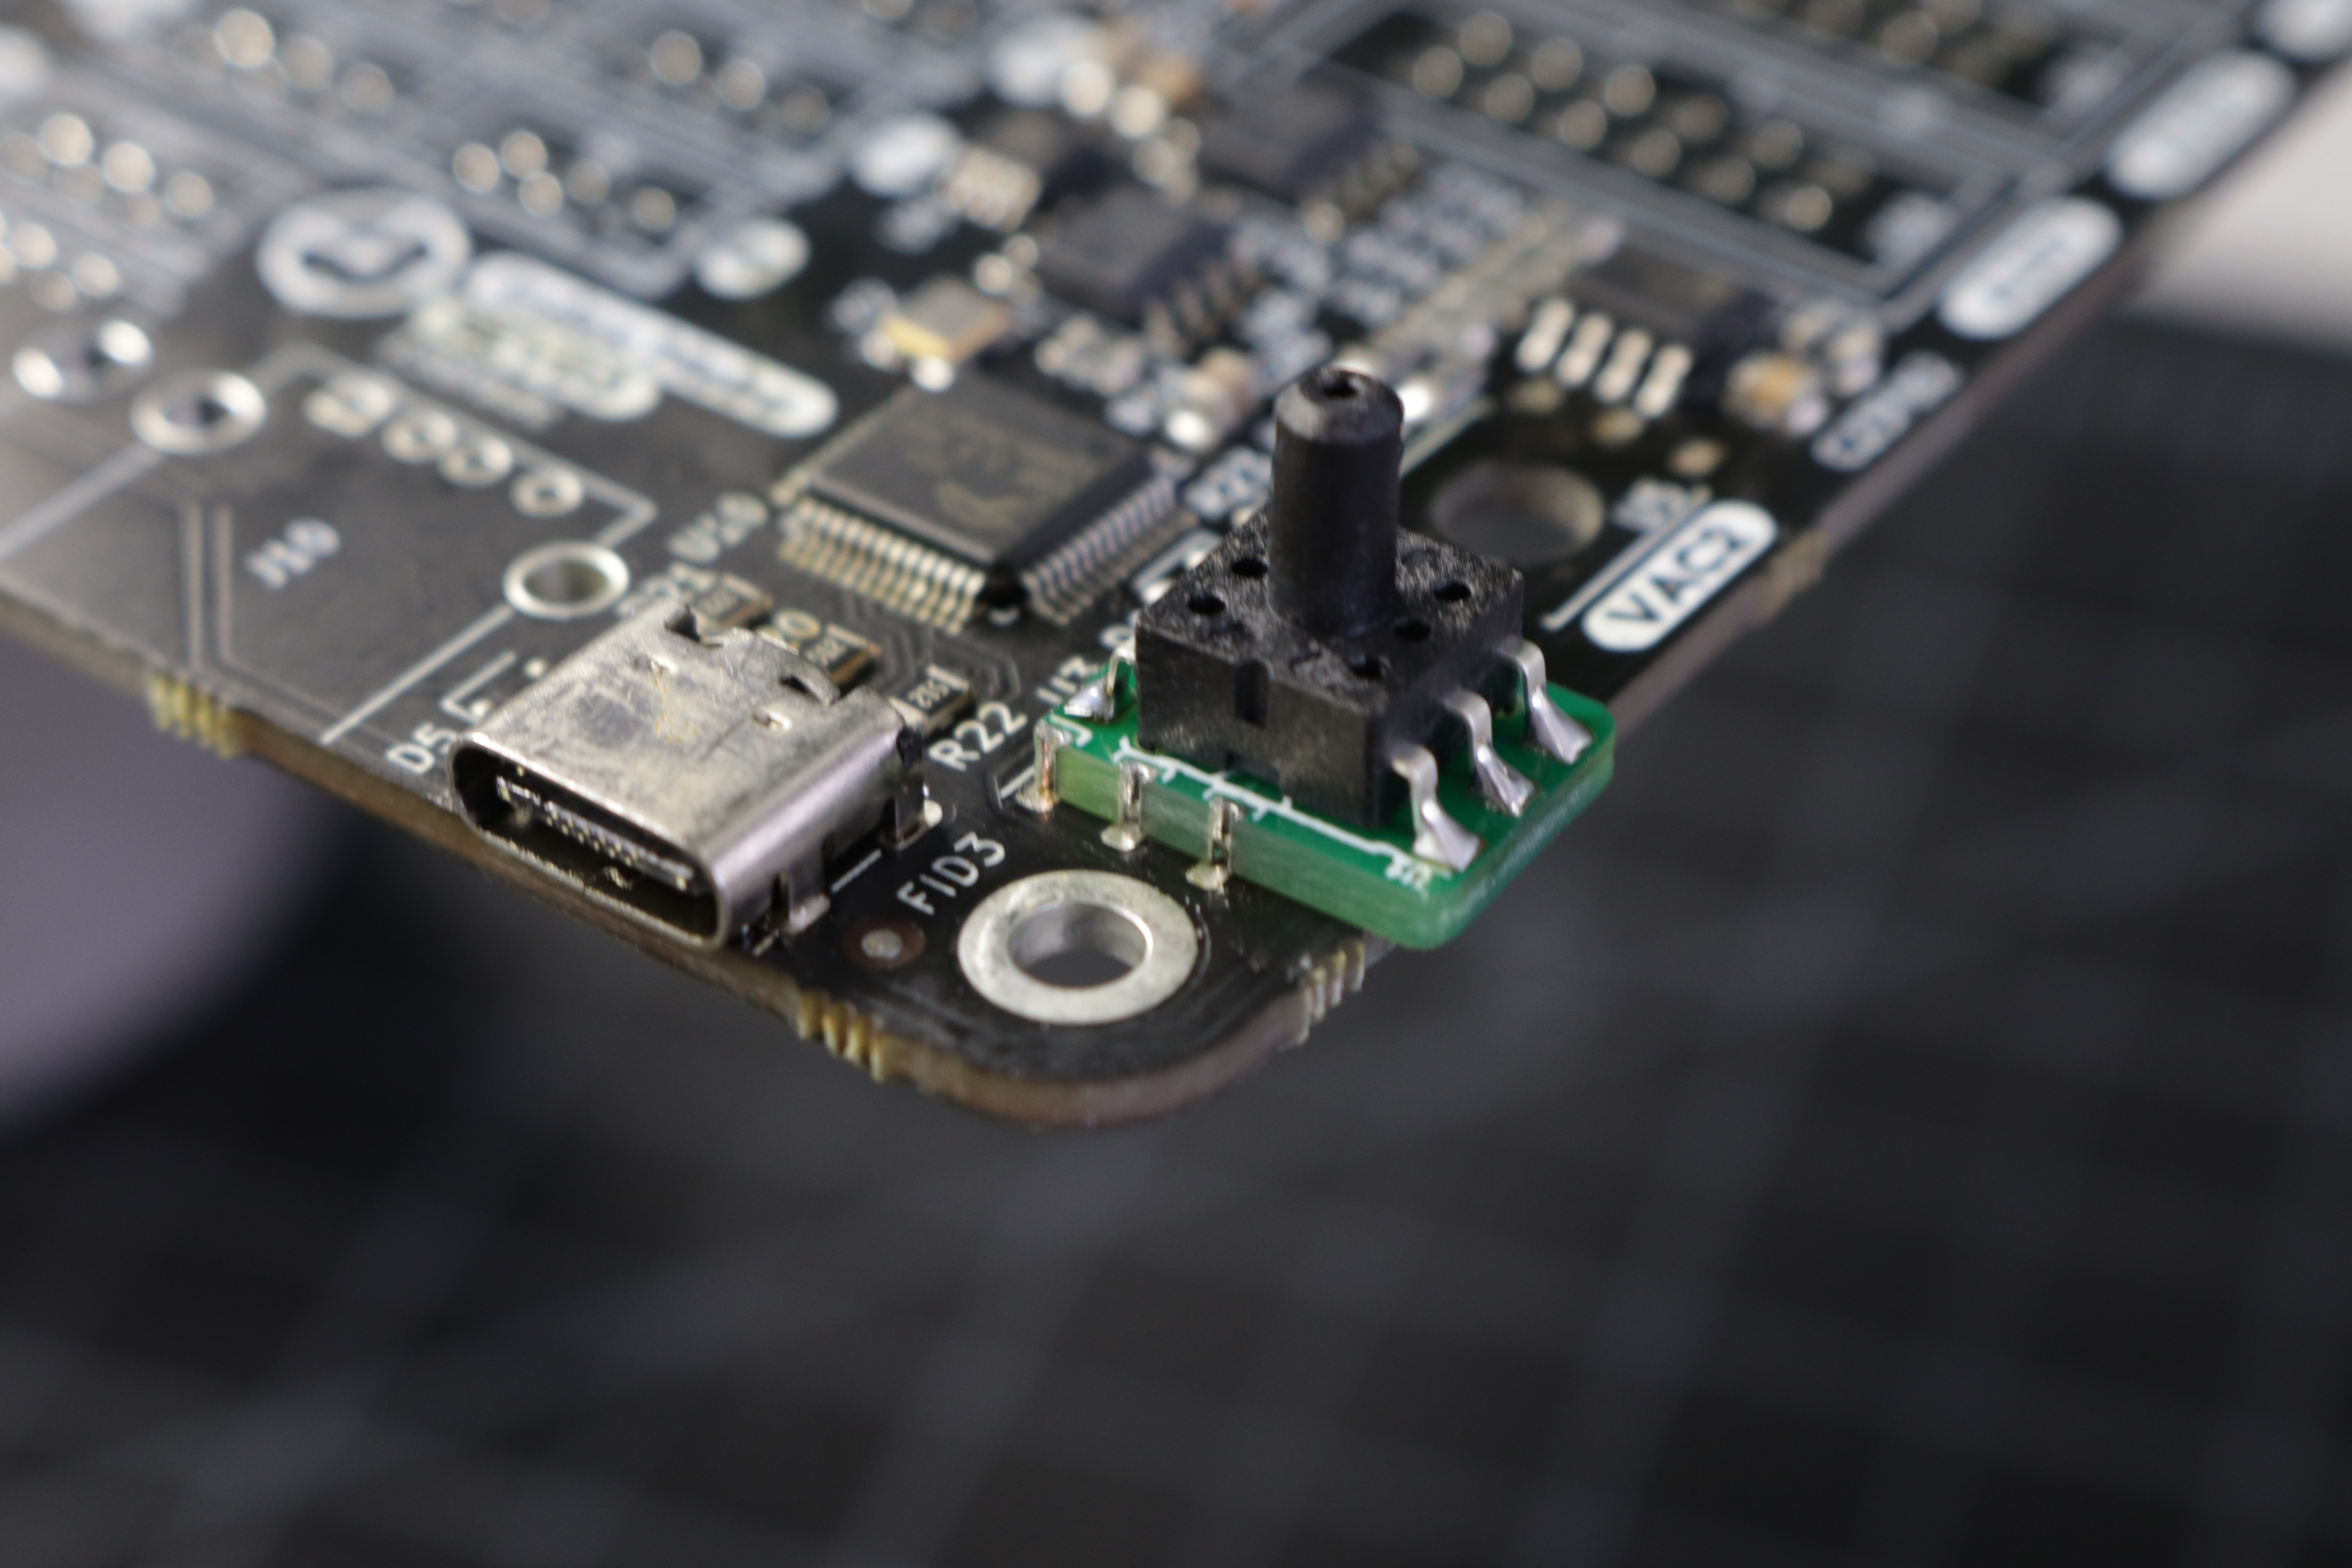 A photo of the interposer placed on the motherboard, with the lower edge overhanging slightly